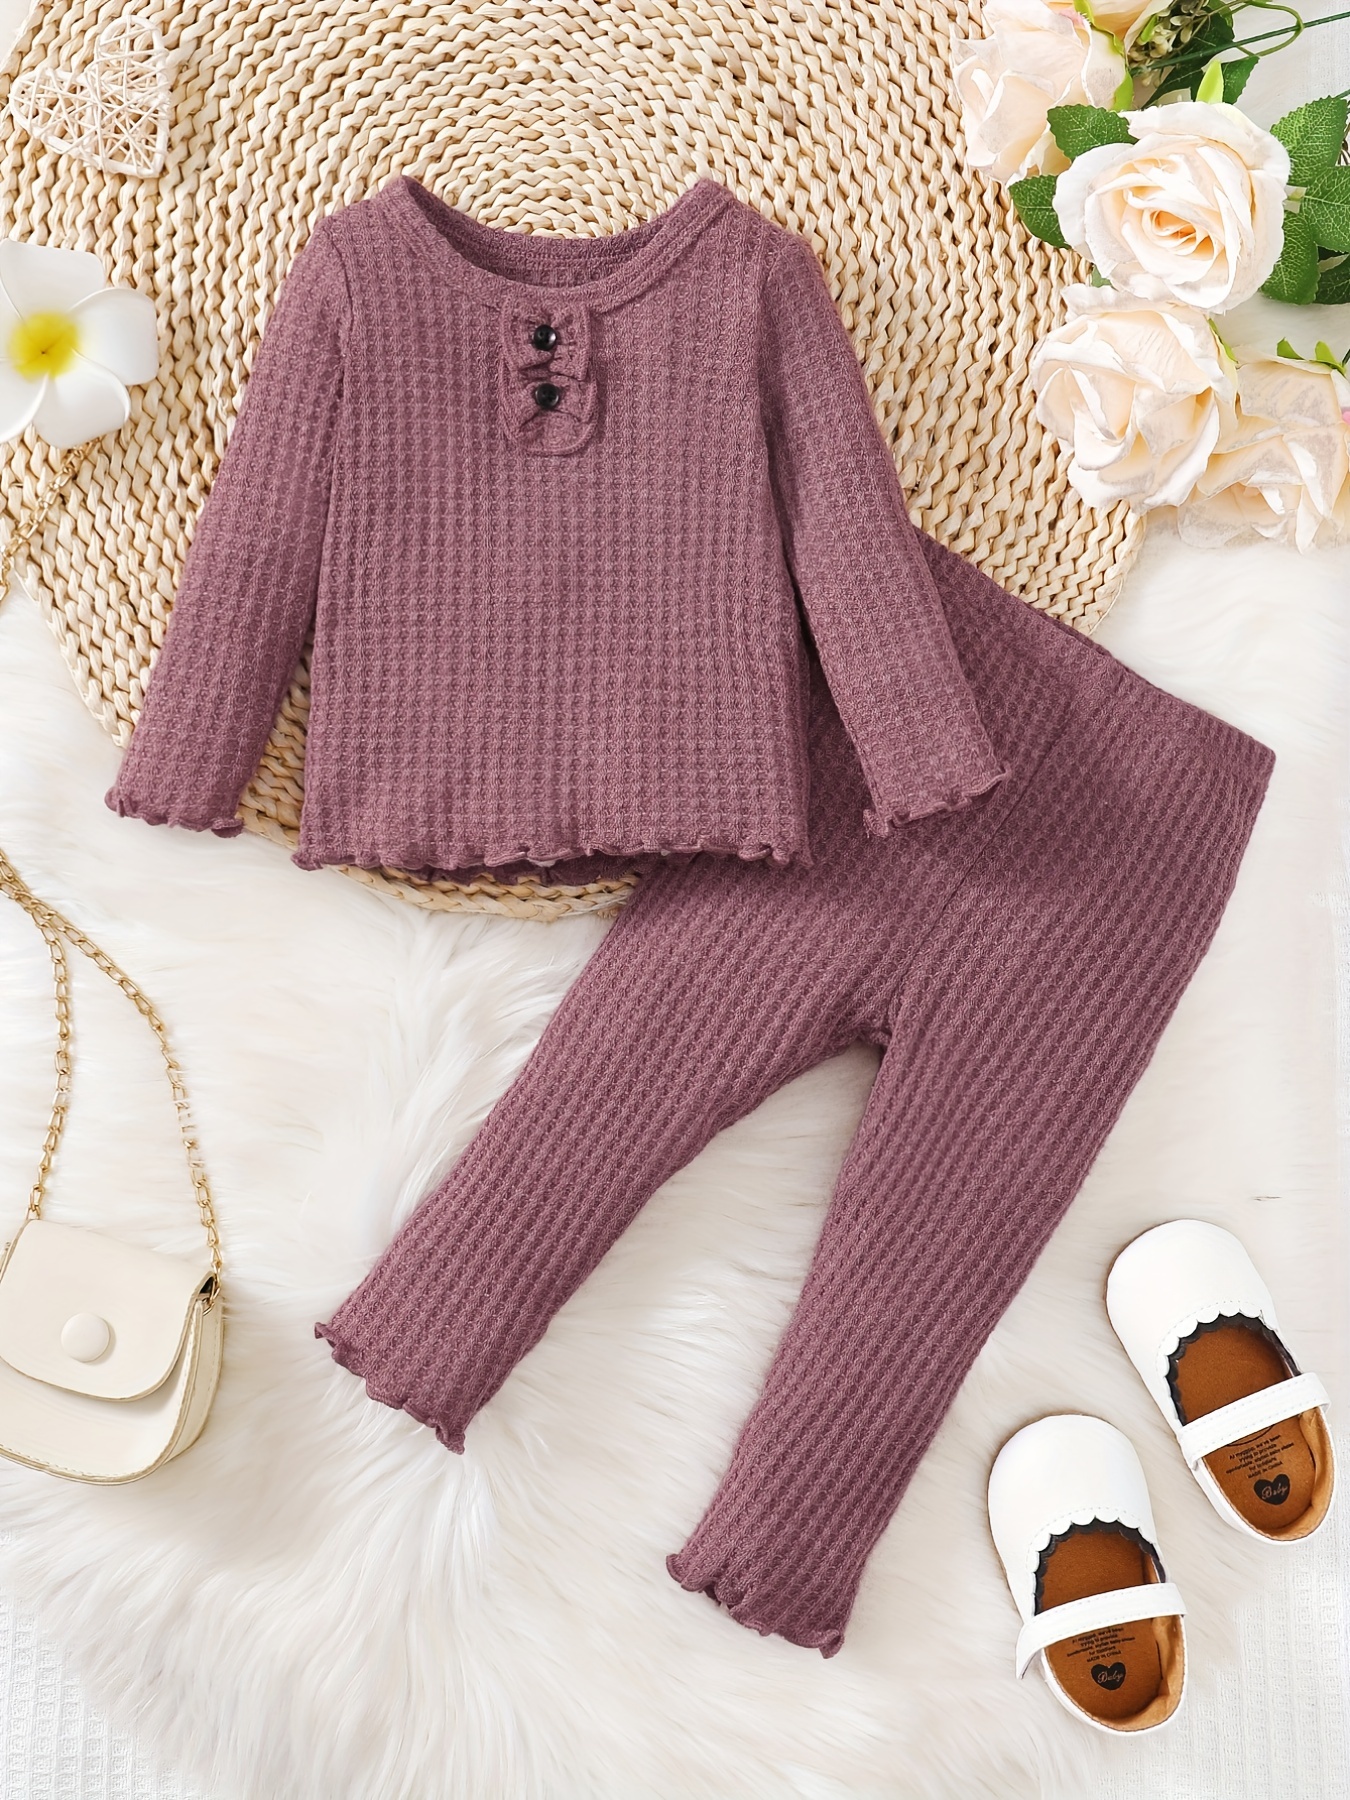 Autumn Children Girl Clothing Set Lace Sleeve Pullover Sweater +